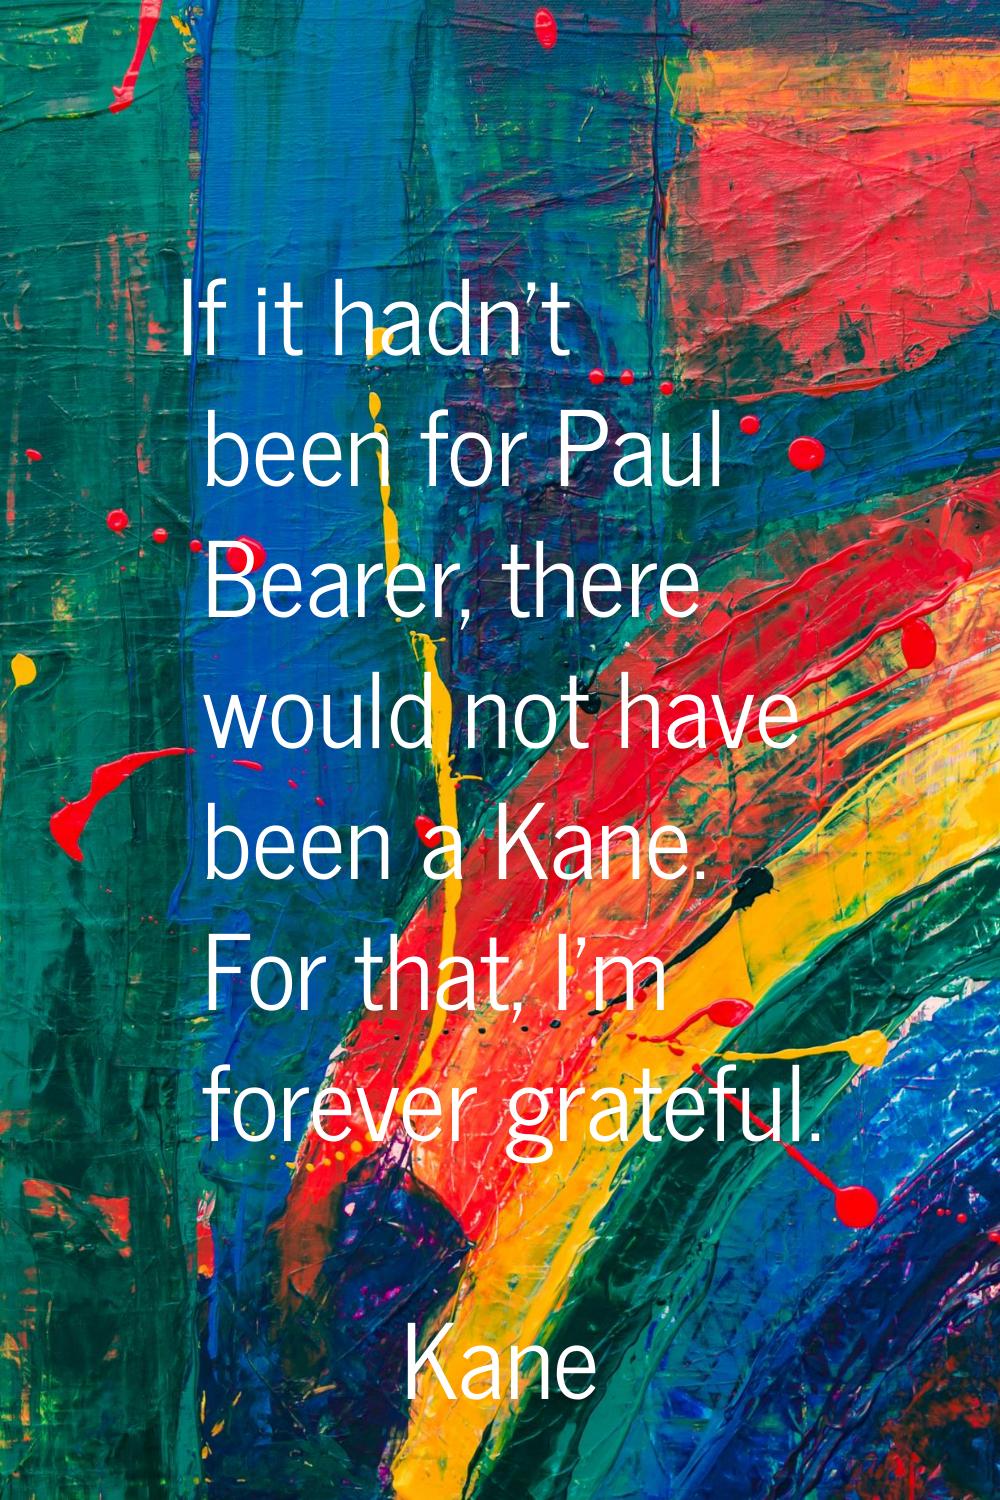 If it hadn't been for Paul Bearer, there would not have been a Kane. For that, I'm forever grateful